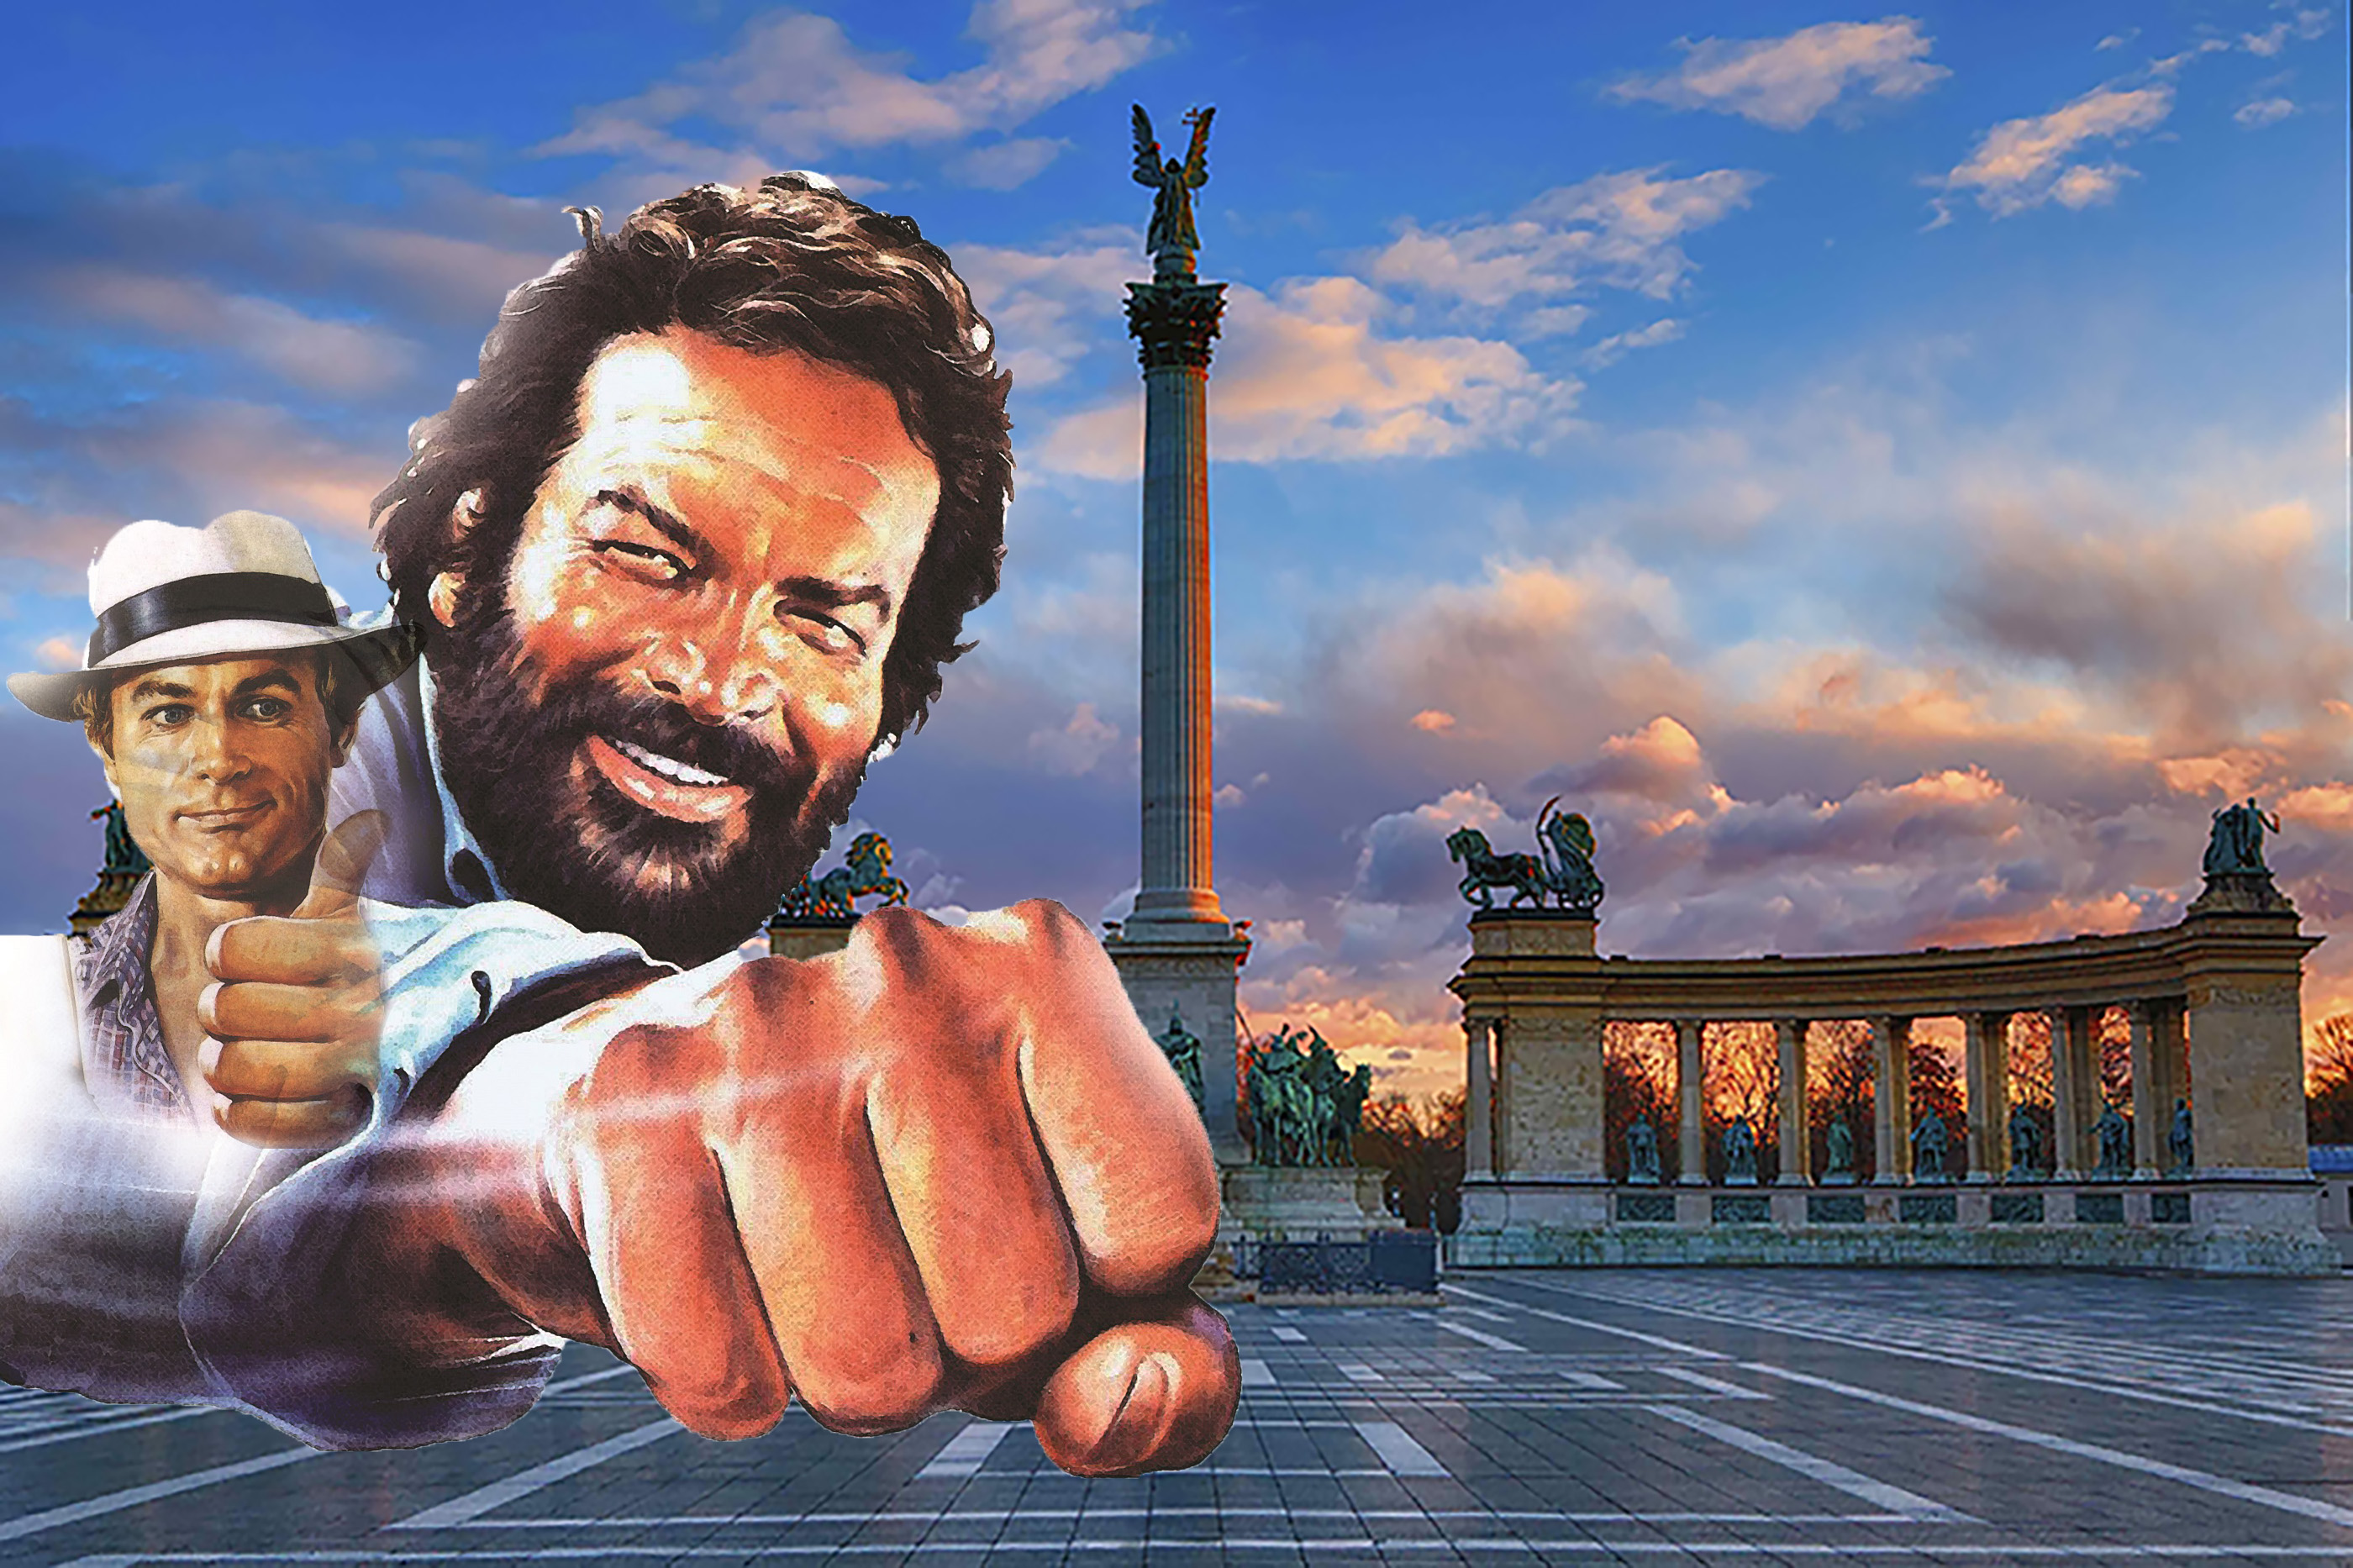 The Best Moments of Bud Spencer & Terence Hill